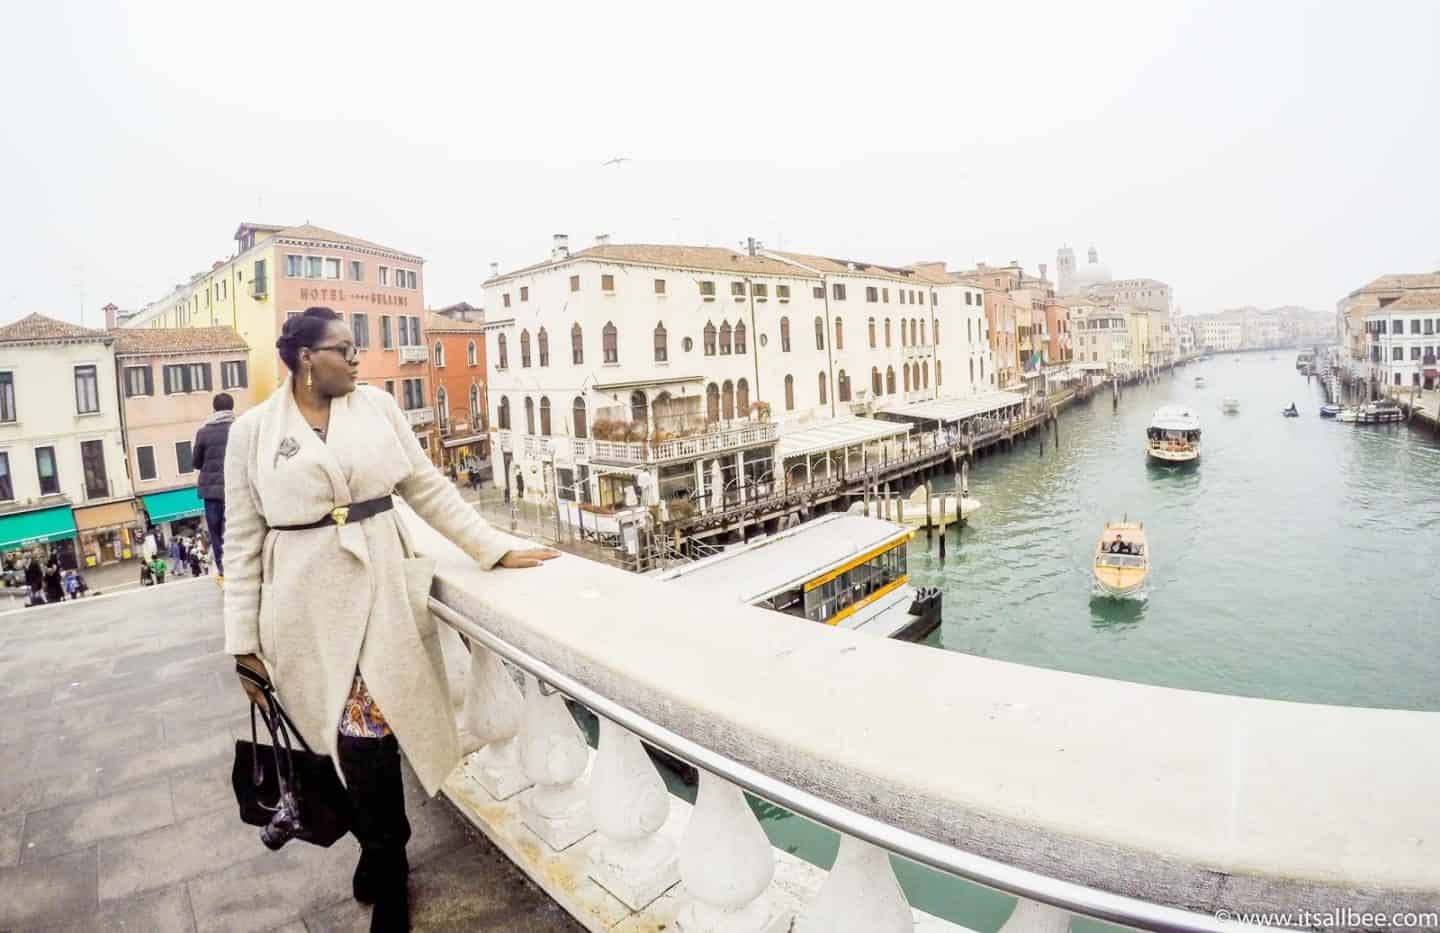  venice 3 day pass | ways to get around venice | | marco polo airport to venice | getting from marco polo airport to venice | venice marco polo to venice | venice airport to venice city | how to get from venice airport to venice | best way to get from venice airport to venice